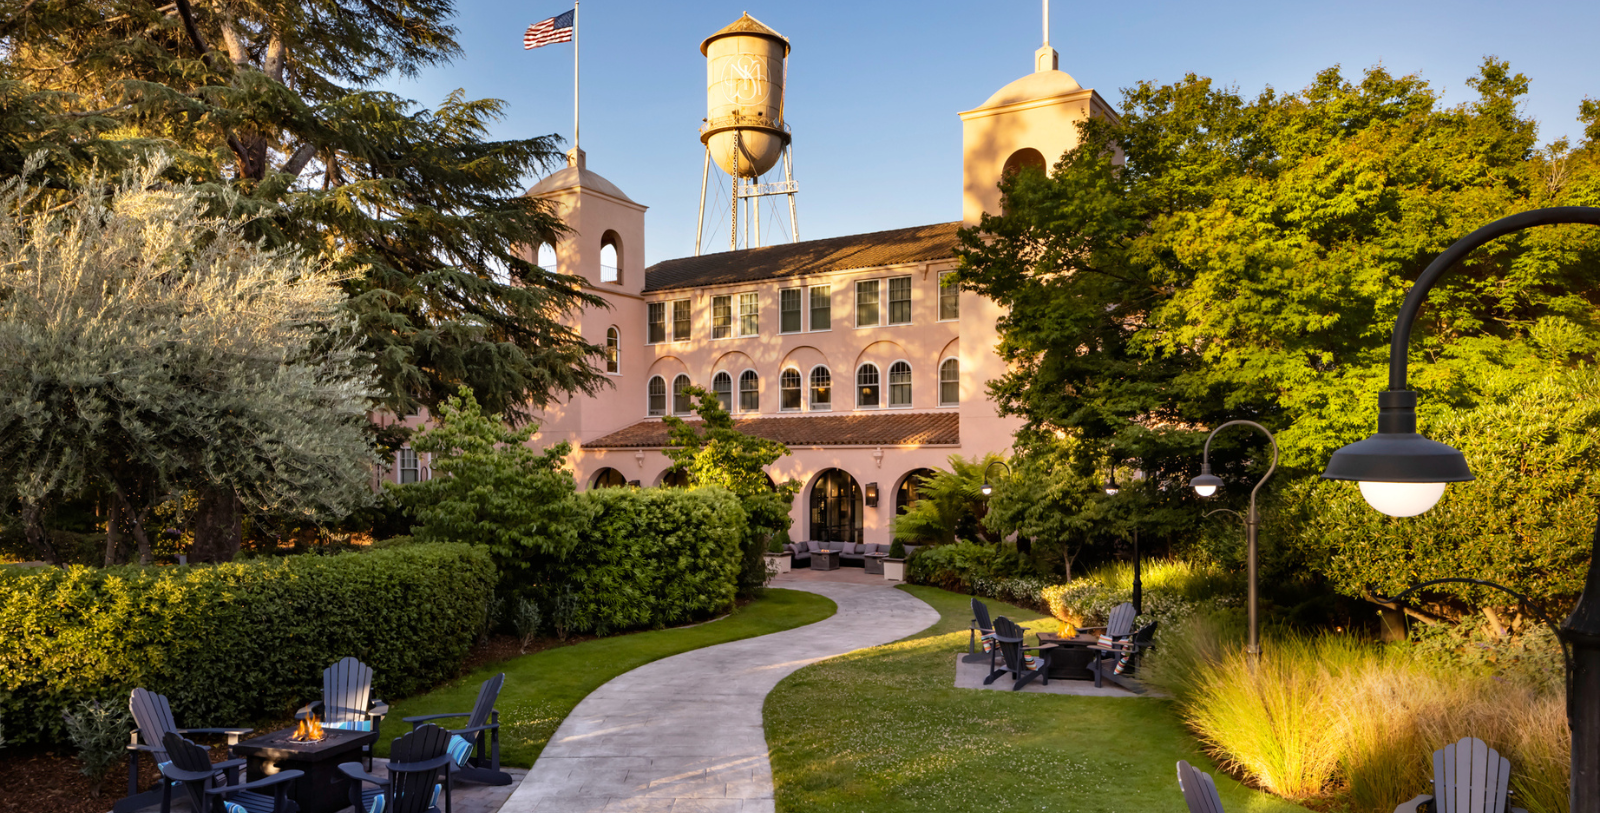 Image of hotel exterior at night Fairmont Sonoma Mission Inn & Spa, 1927, Member of Historic Hotels of America, in Sonoma, California, Overview